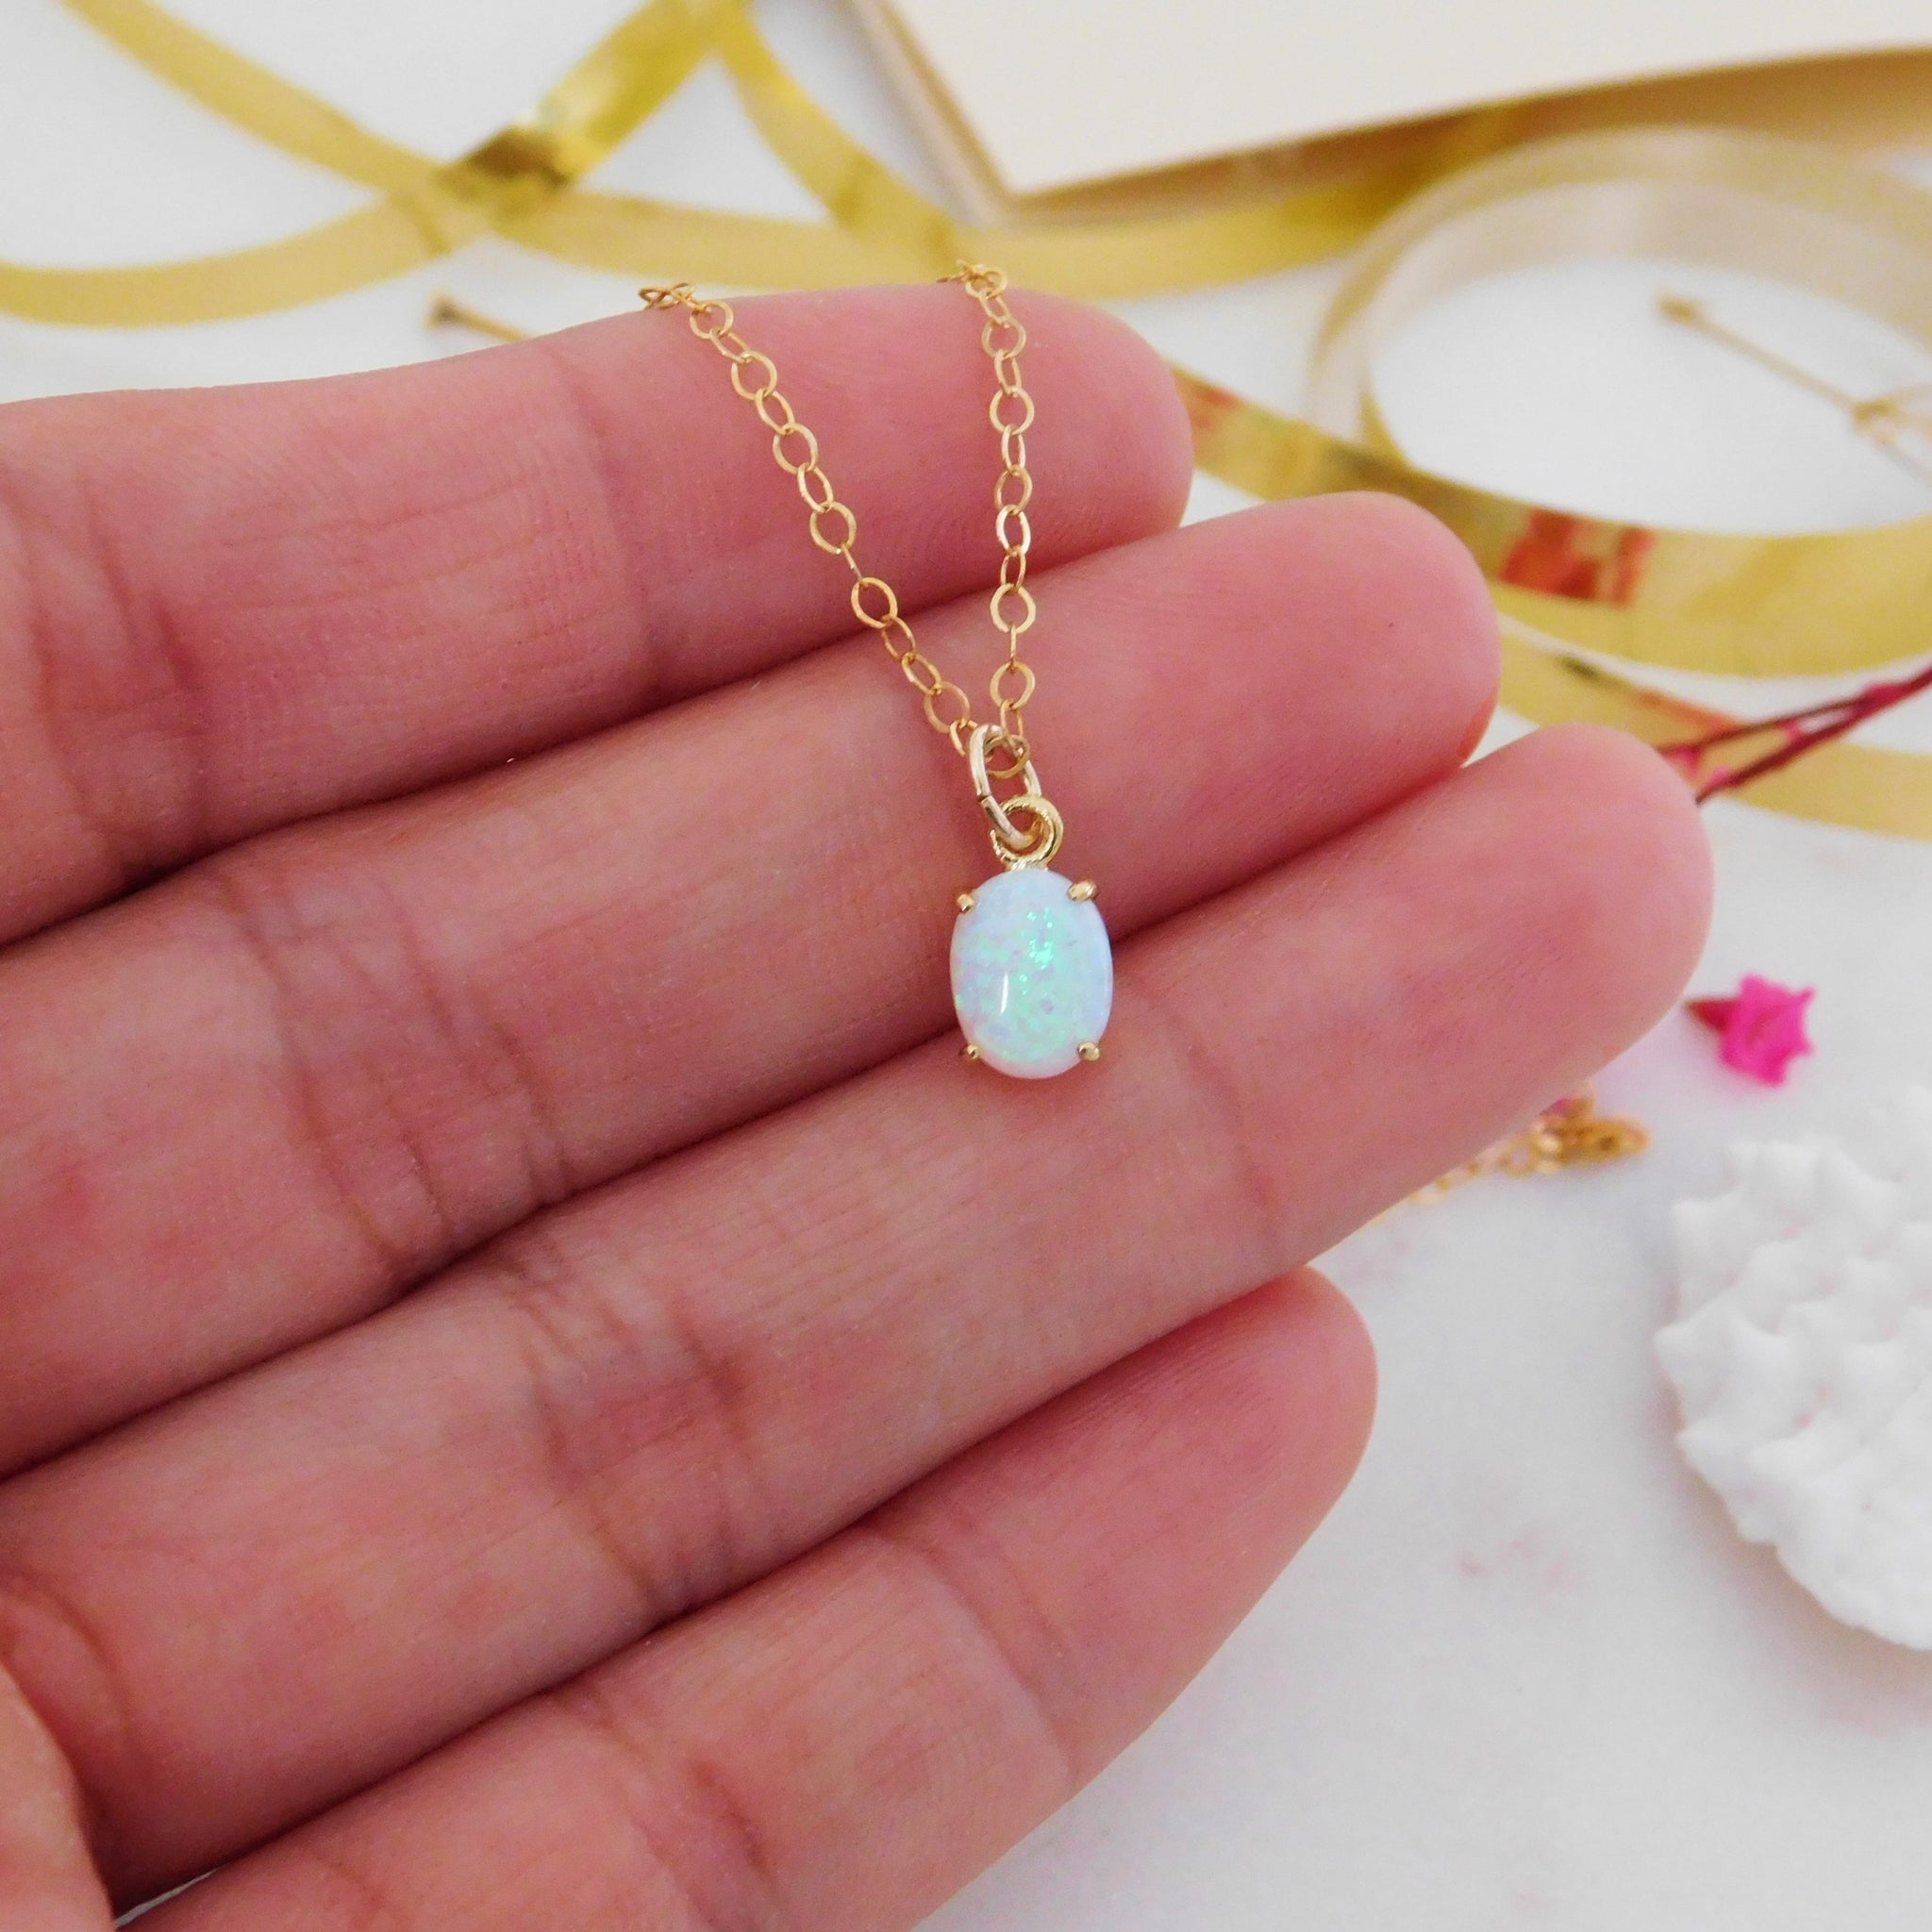 22kt Gold Opal Pendant on Cord – Pippa Small